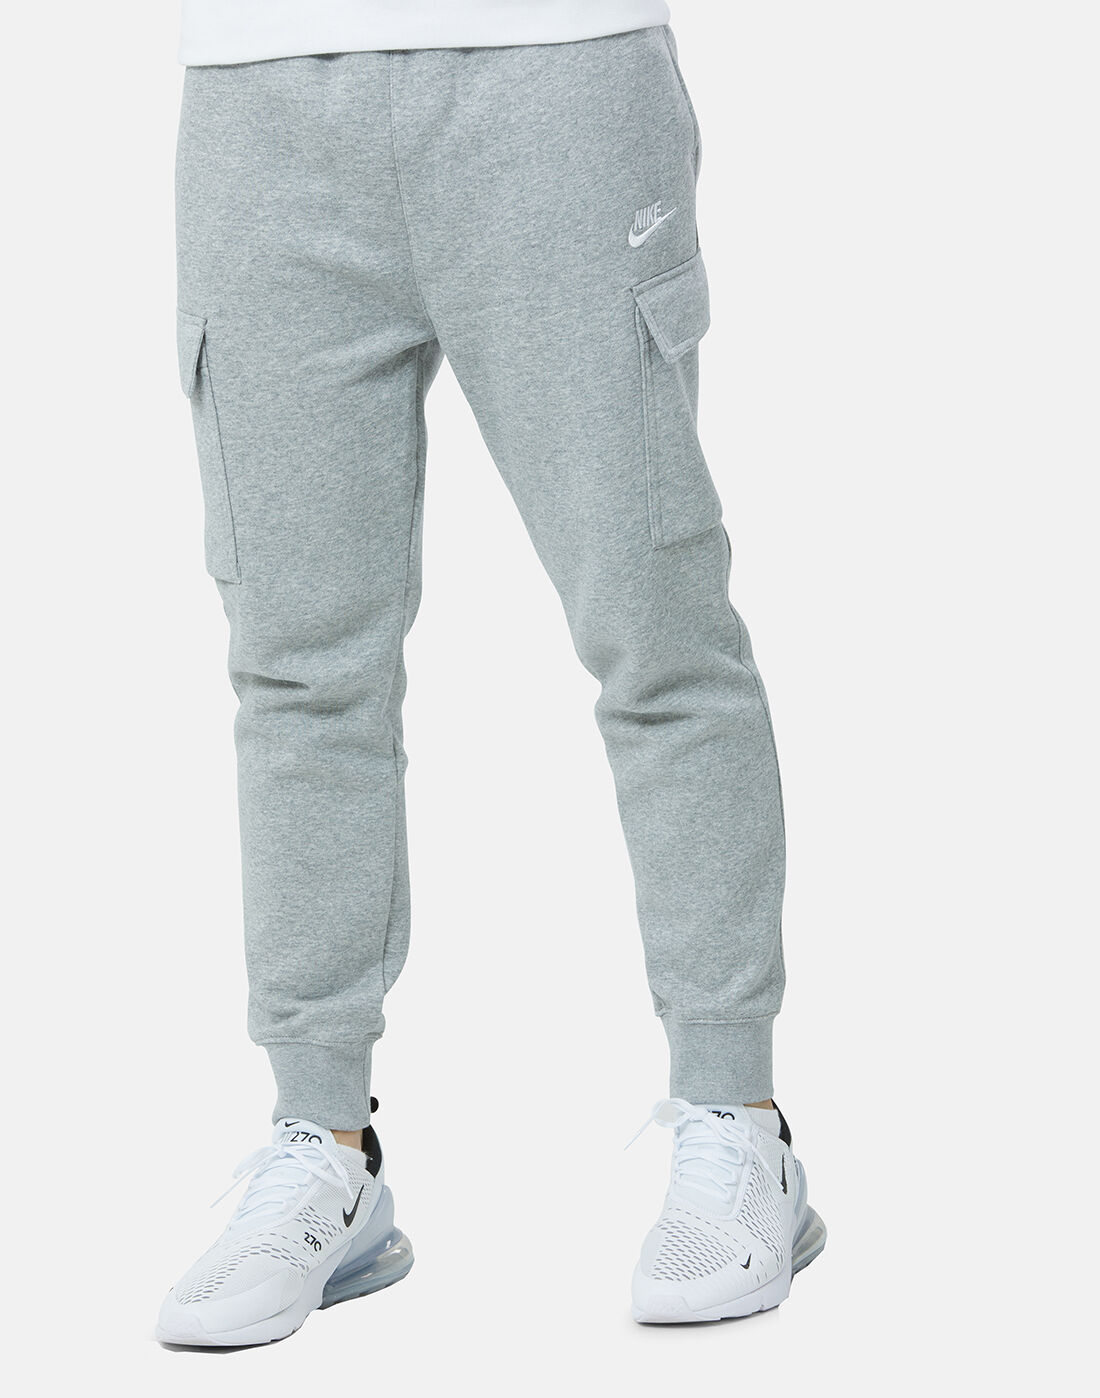 Men's Cargo Pants at Nike - Clothing | Stylicy Singapore